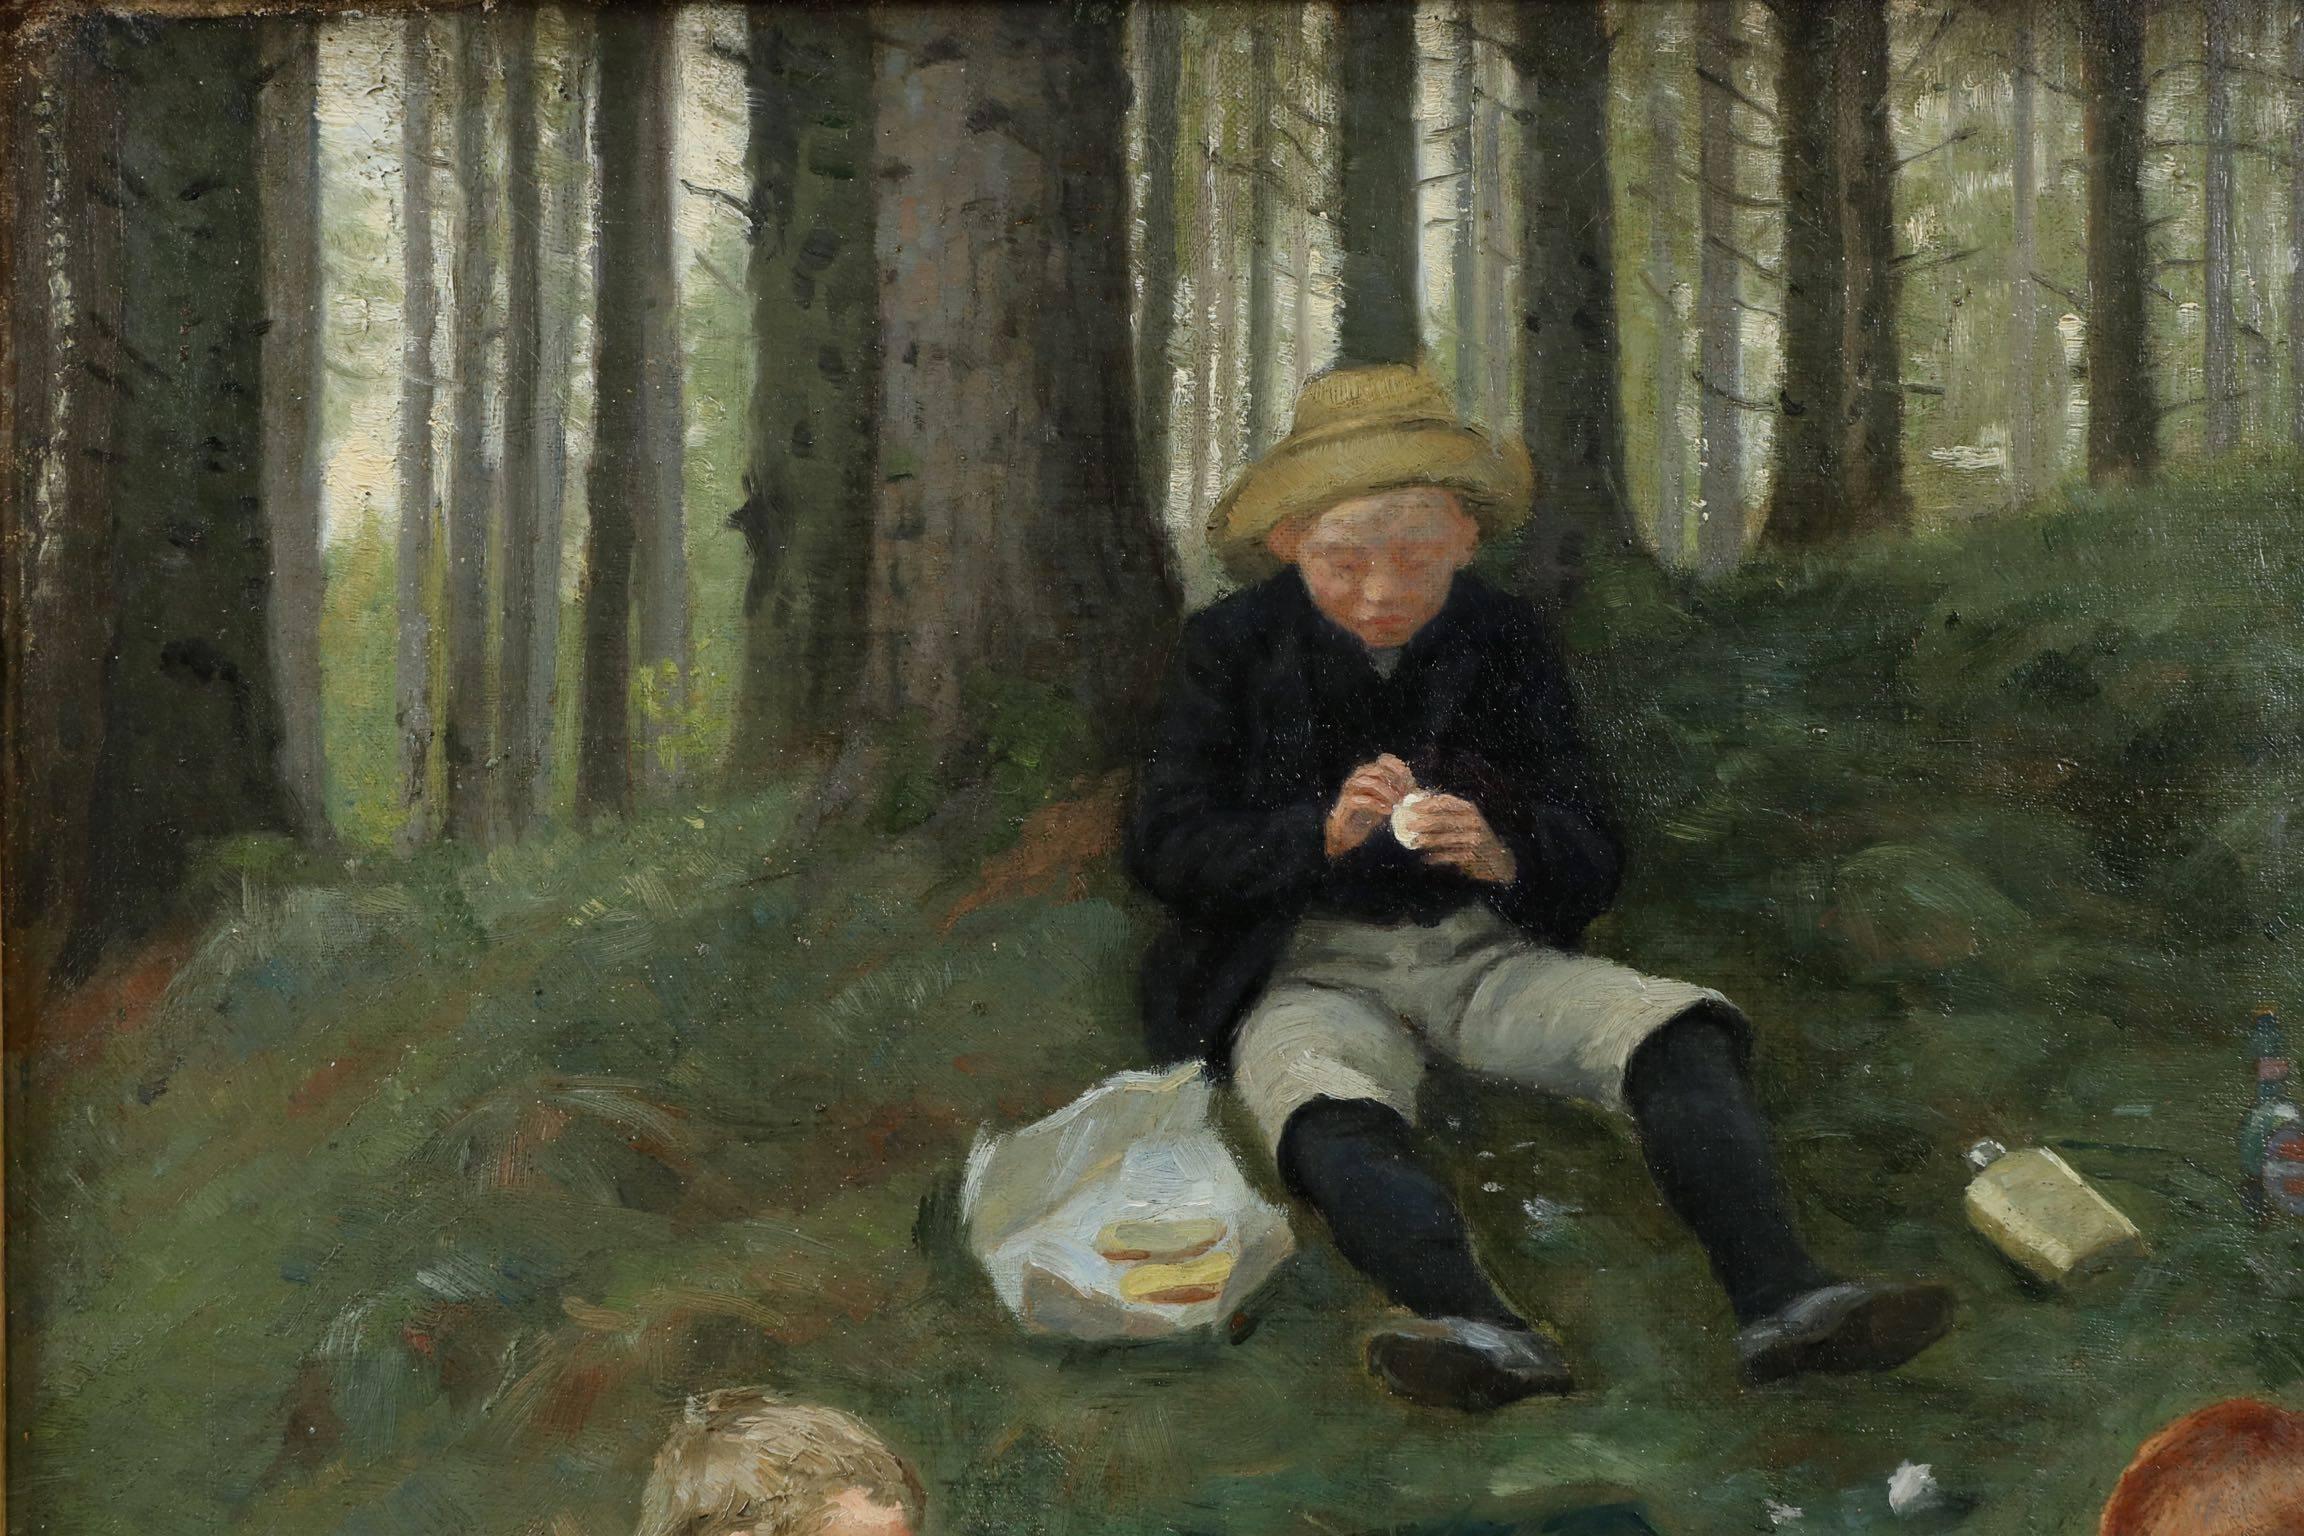 After moving with his parents to Copenhagen, Malthe Engelsted received a degree in theology before enrolling at an art academy. In 1879 he exhibited at Salon and was awarded the Neuhausen in recognition of his painting 'Scene from Children’s Life'